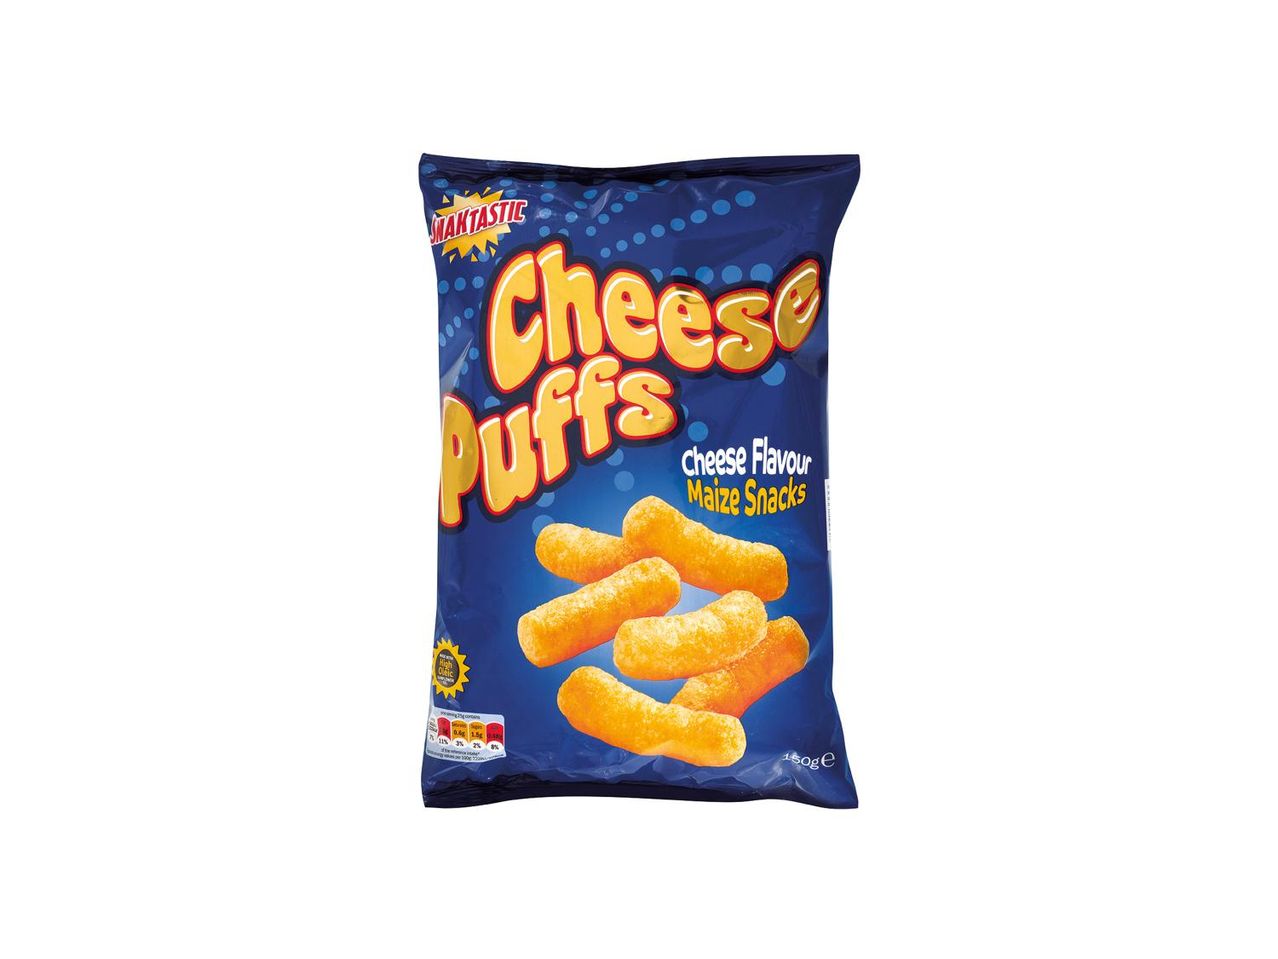 Go to full screen view: Snaktastic Cheese Puffs - Image 1